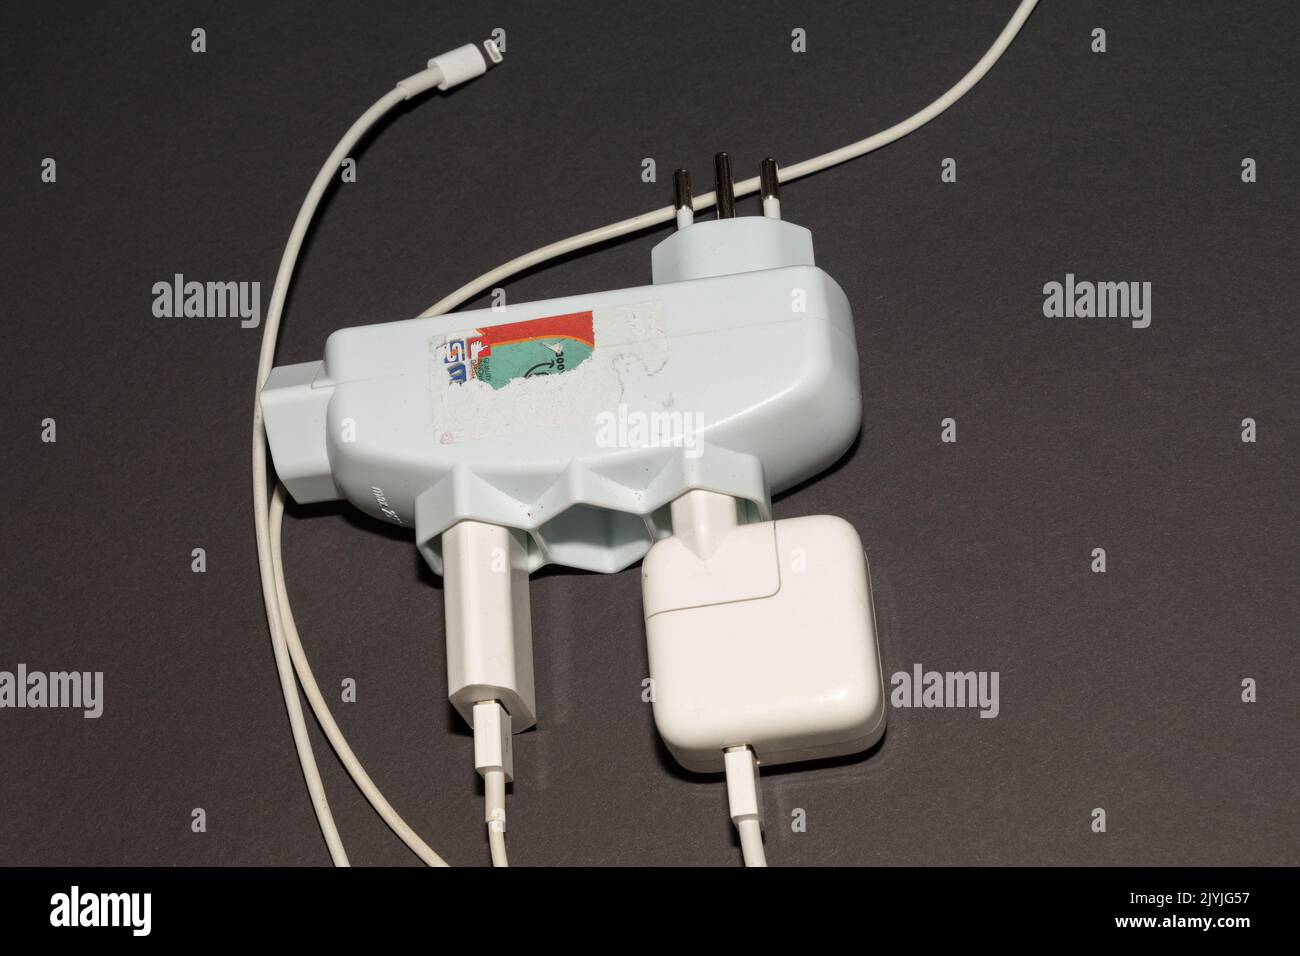 Vaduz, Liechtenstein, September 6, 2022 Electric power plug put in a socket to generate electricity in an apartment Stock Photo